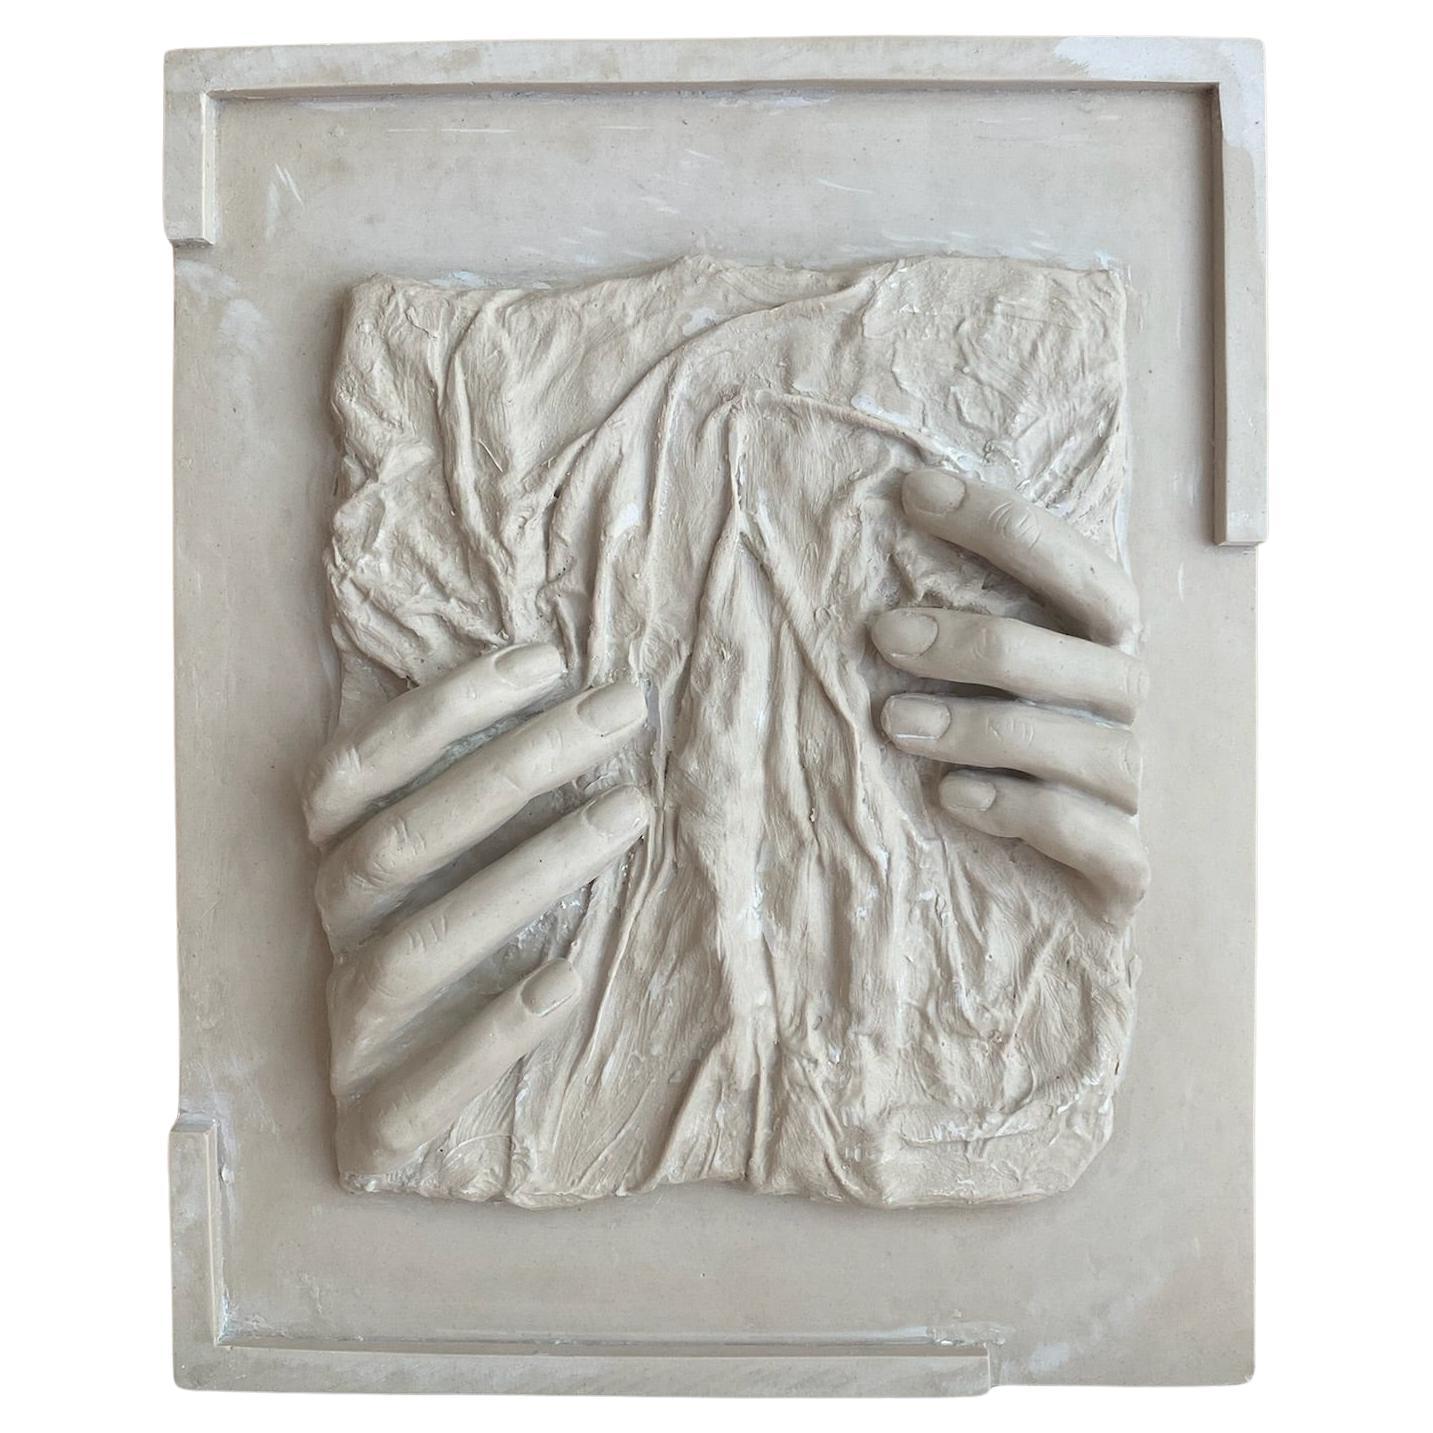 Marcela Cure Hands Wall Art Sculpture Resin and Stone - Number 22 For Sale